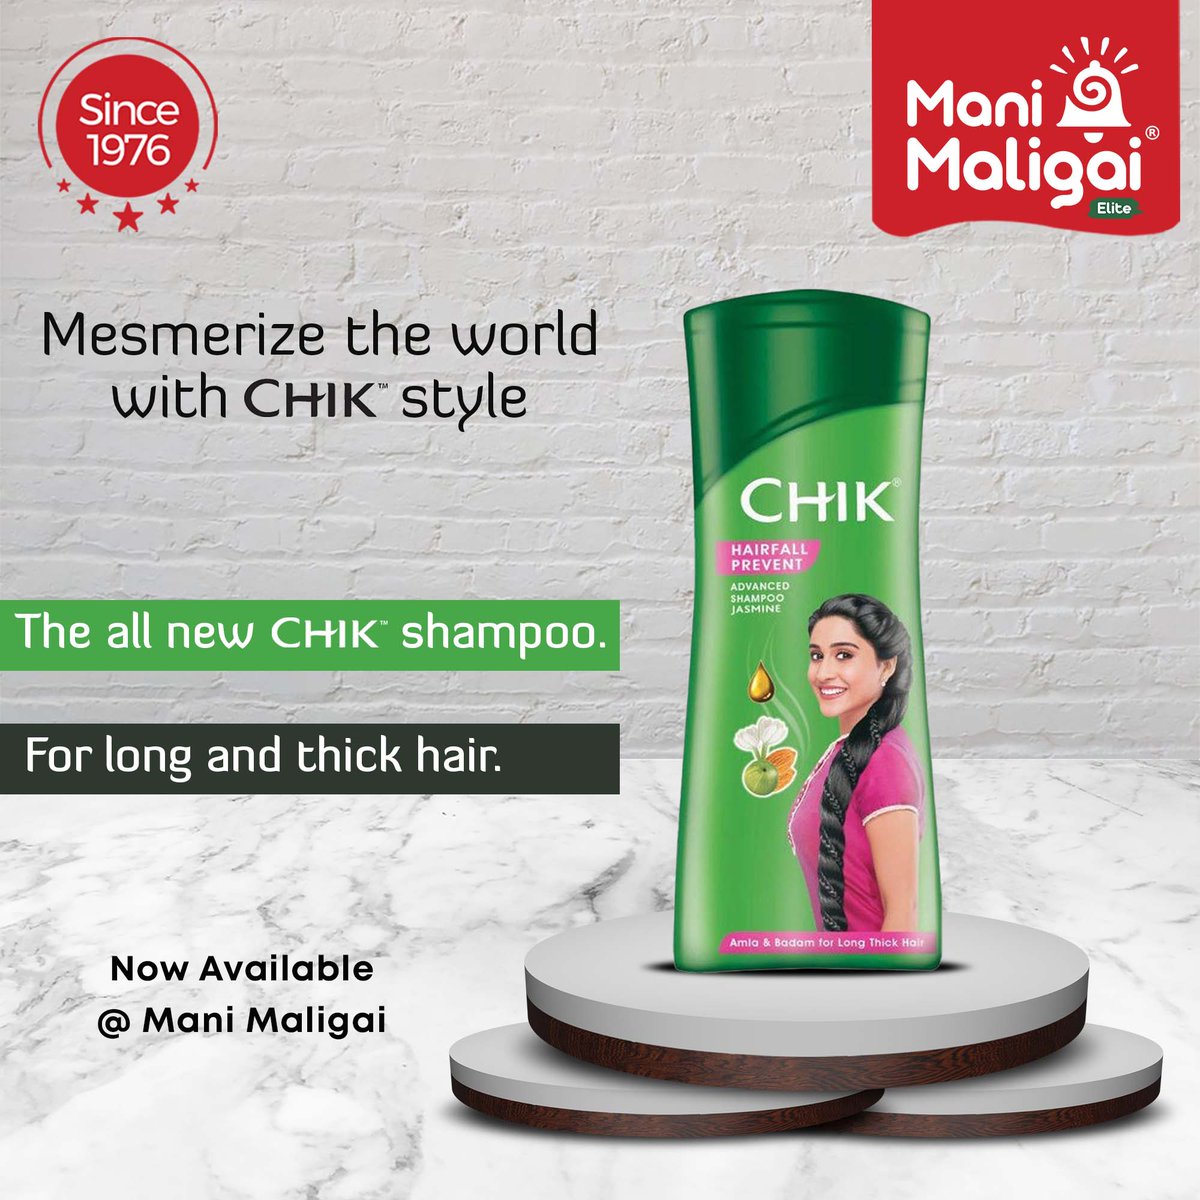 Mesmerize the world with CHIK Style!

Say goodbye to bad hair days & hello to gorgeous locks with Chik Shampoo. Discover the secret to healthy hair with our range of nourishing shampoos.

📞99924 99924
linkto.contact/MM-WA

#Manimaligai #Pollachi #Groceryshop #ChikShampoo